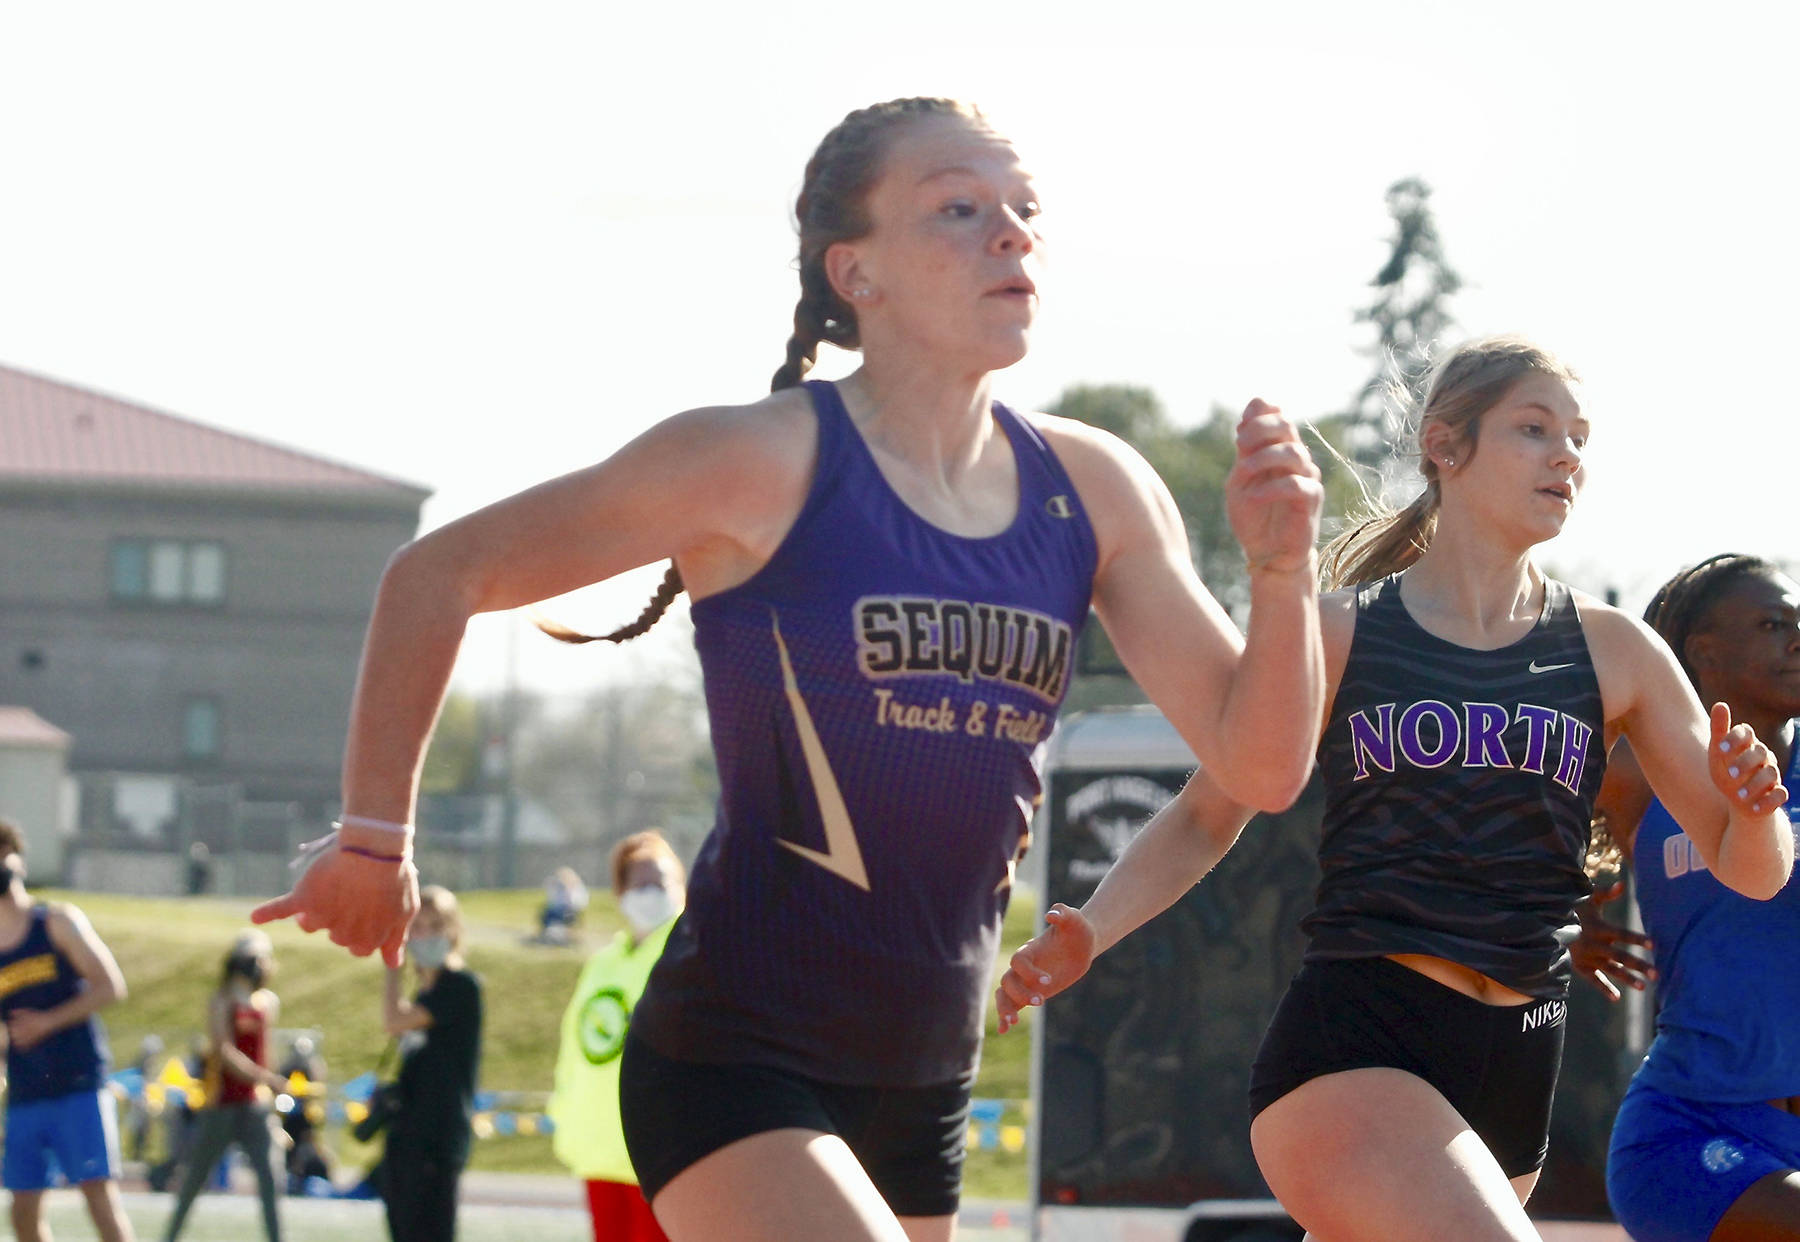 Sequim’s Riley Pyeatt runs neck-and-neck with Lillian Pruden of North Kitsap in the 100-meter race. She finished second in the 100 but set a school record time in the 400 at the Class 1A/2A/3A Olympic League Championships at Bremerton High School on April 22 and 24. Photo by Mark Krulish/Kitsap News Group